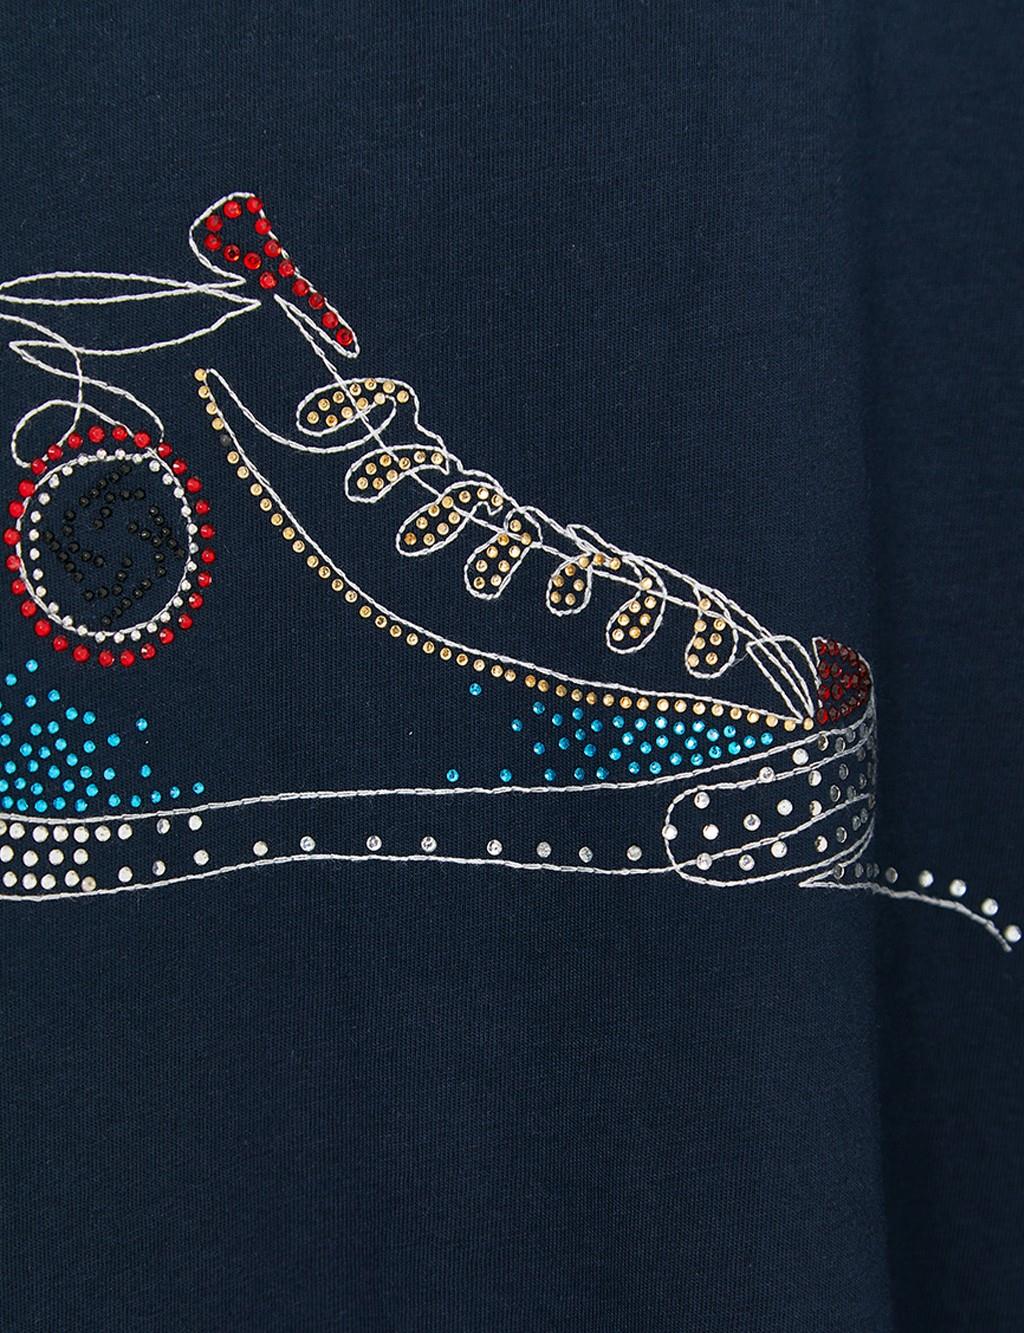 Embroidered T-Shirt Navy